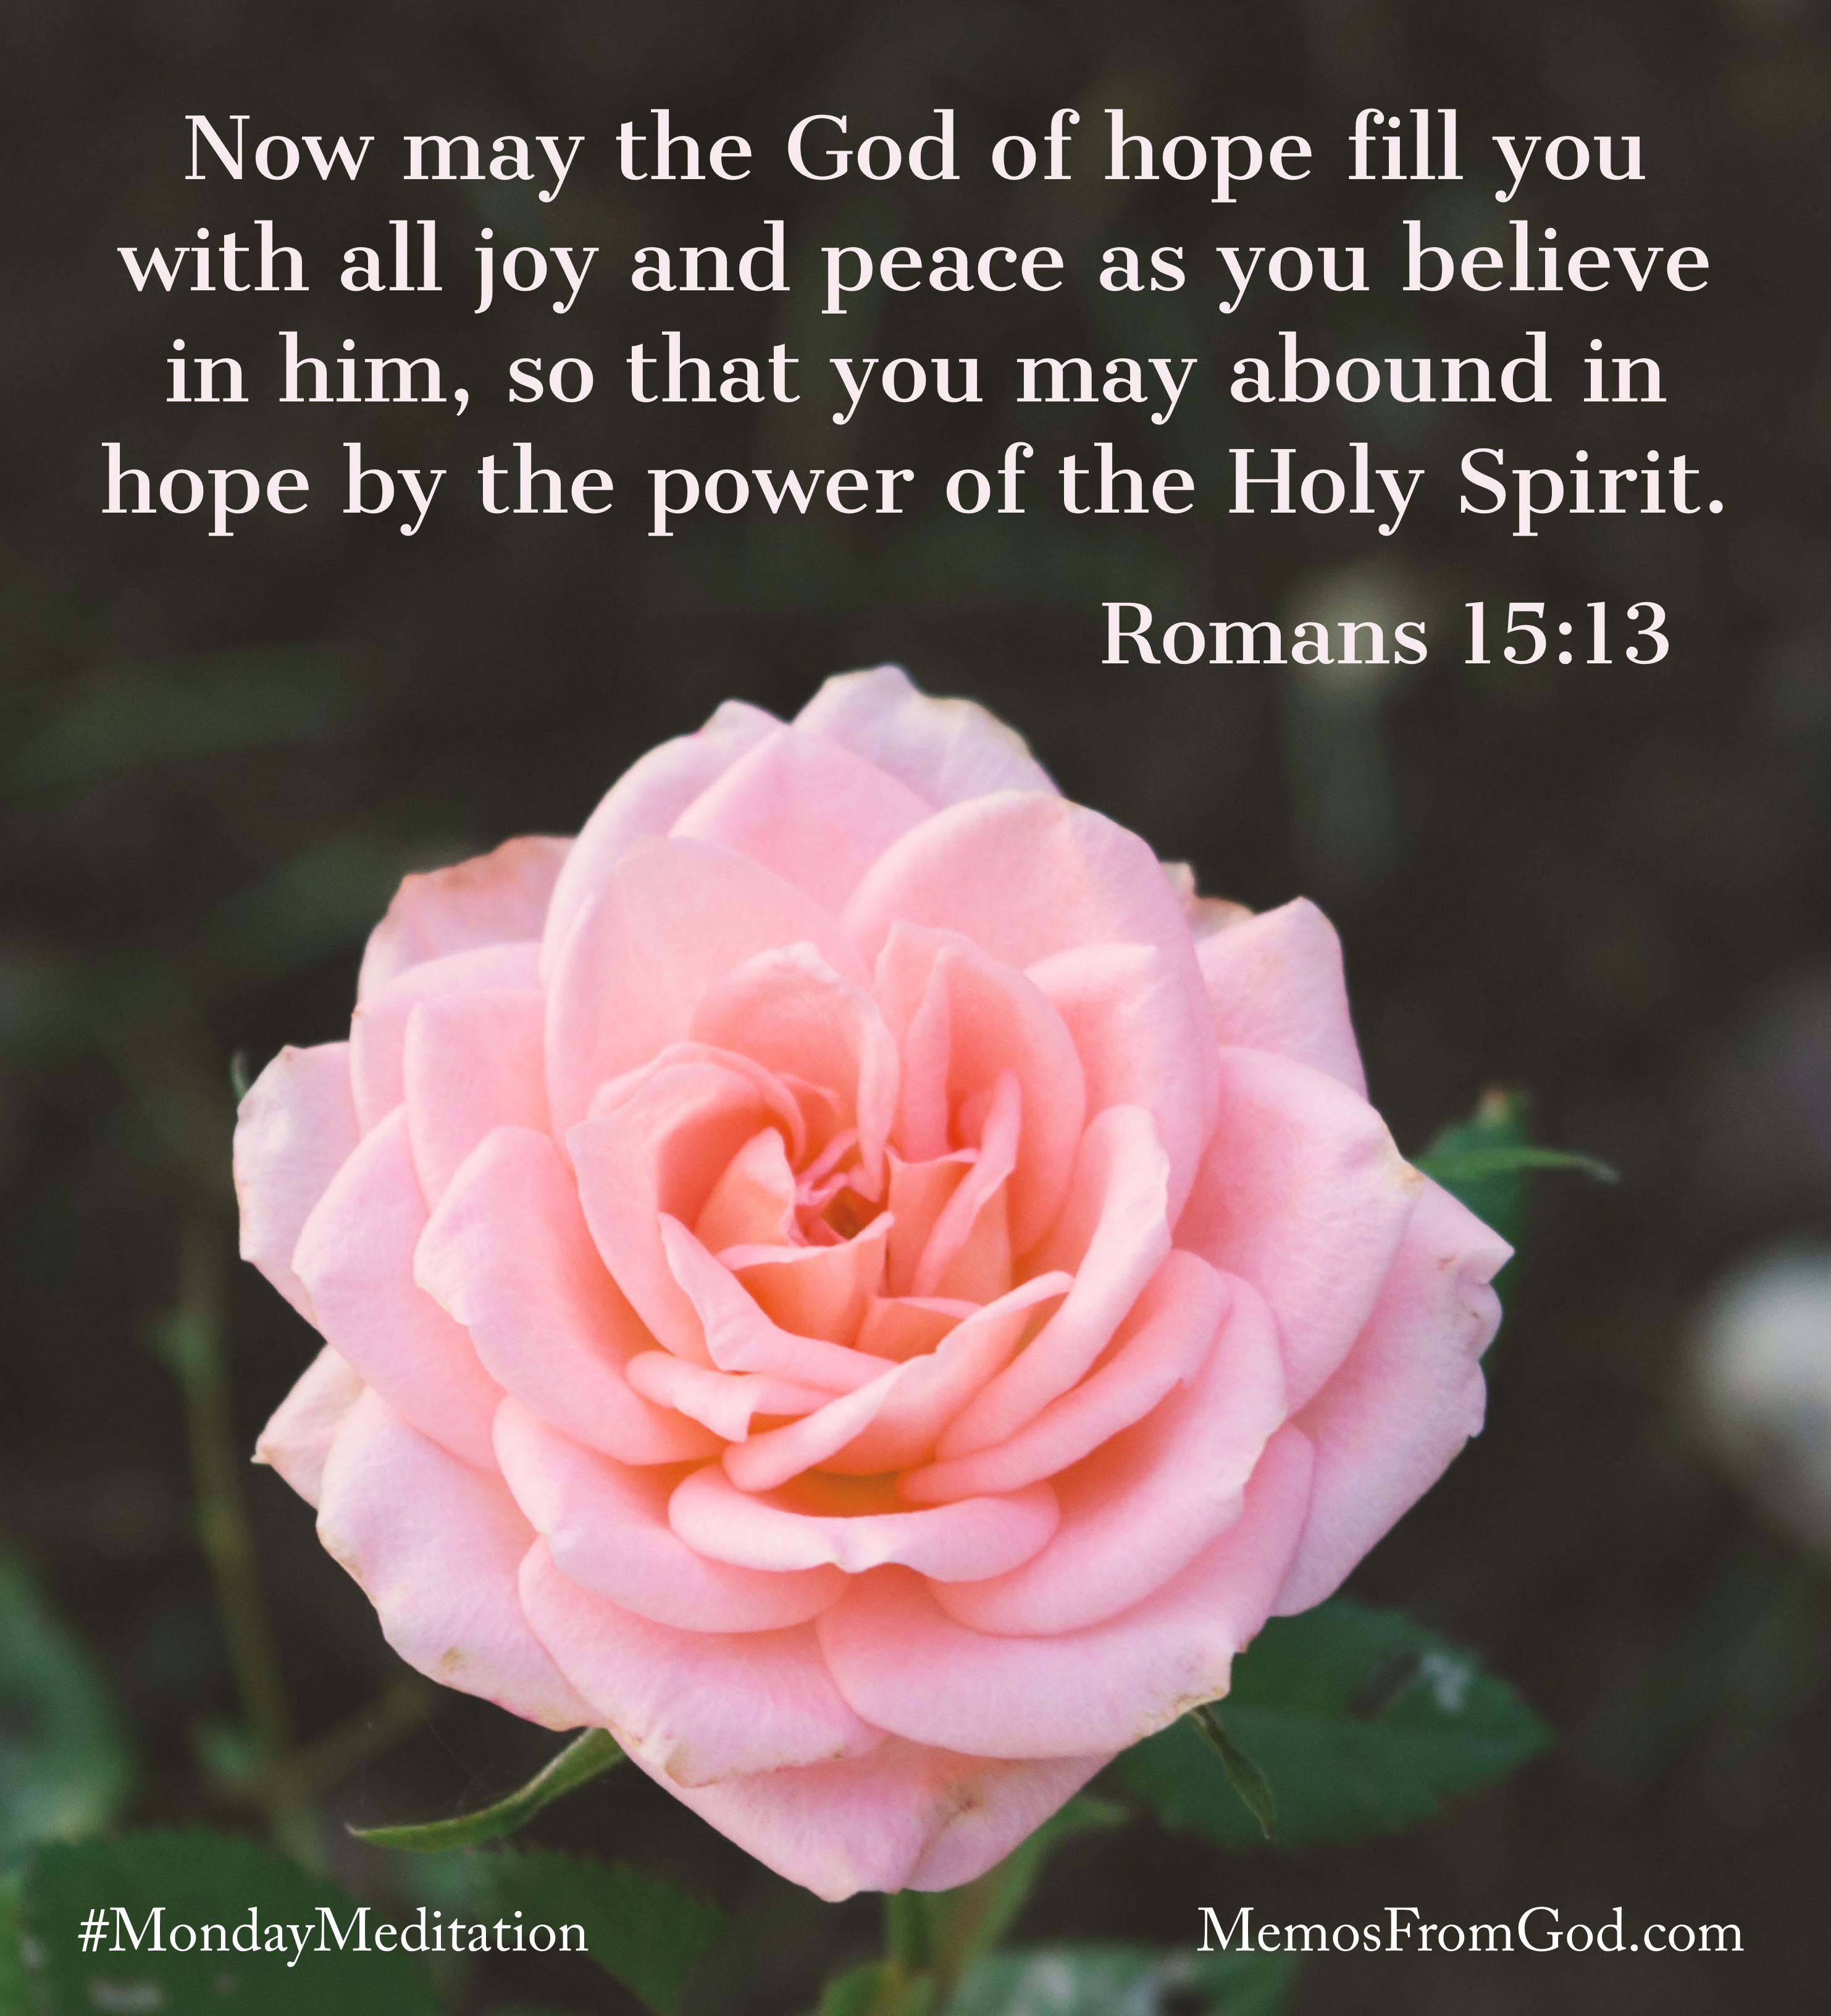 A single, pink, fully-opened rose on a dark green background. Caption: Now may the God of hope fill you with all joy and peace as you believe in him, so that you may abound in hope by the power of the Holy Spirit. Romans 15:13